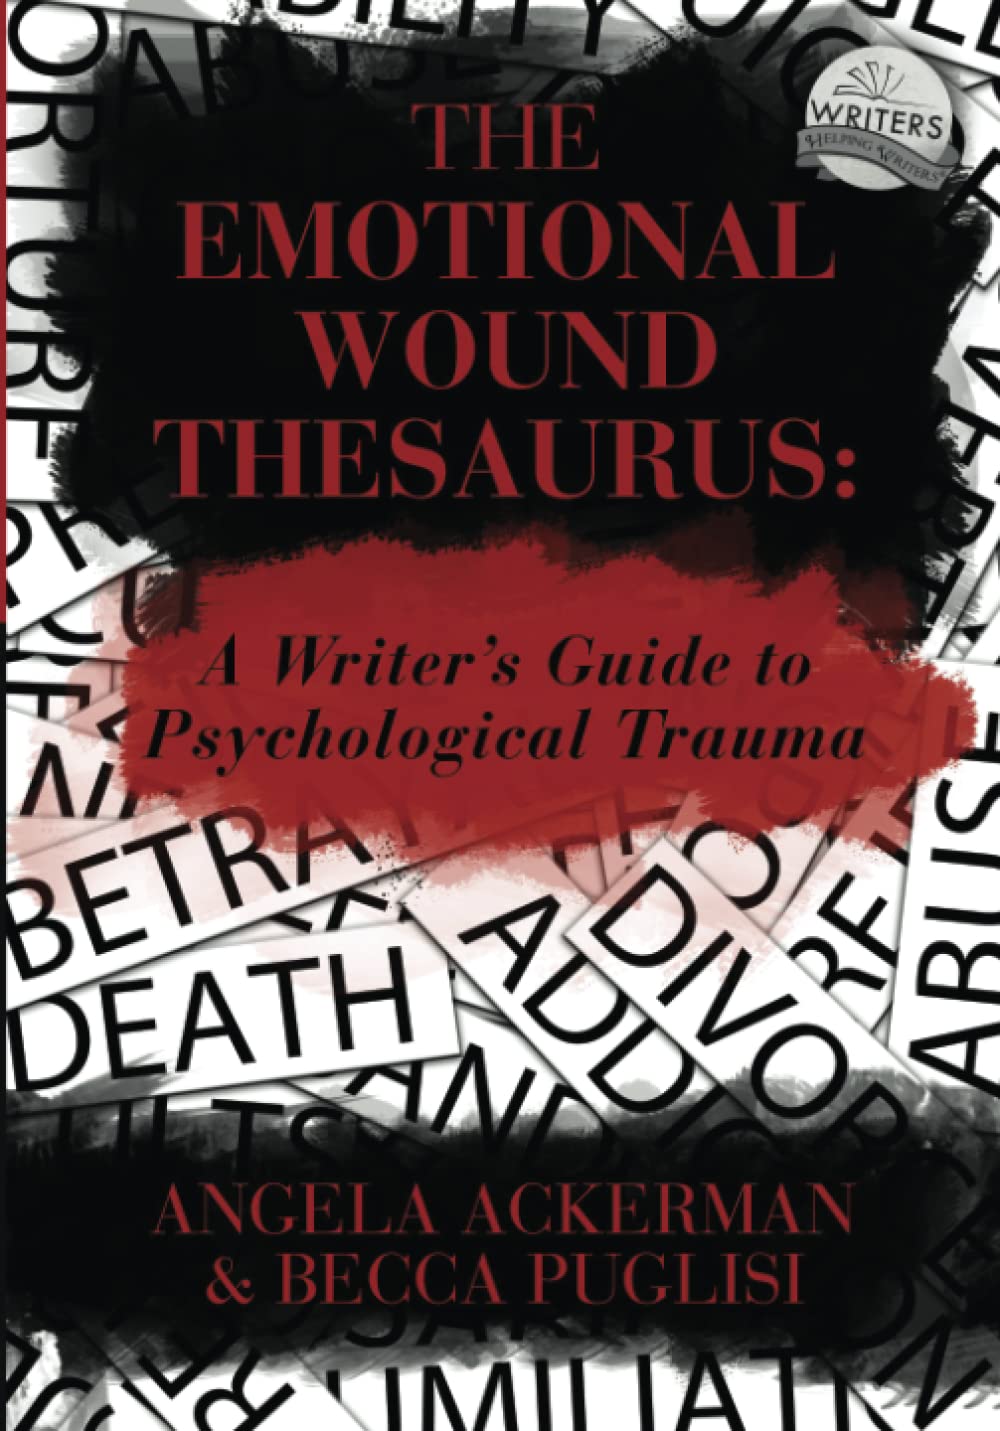 The Emotional Wound Thesaurus: A Writer’s Guide to Psychological Trauma